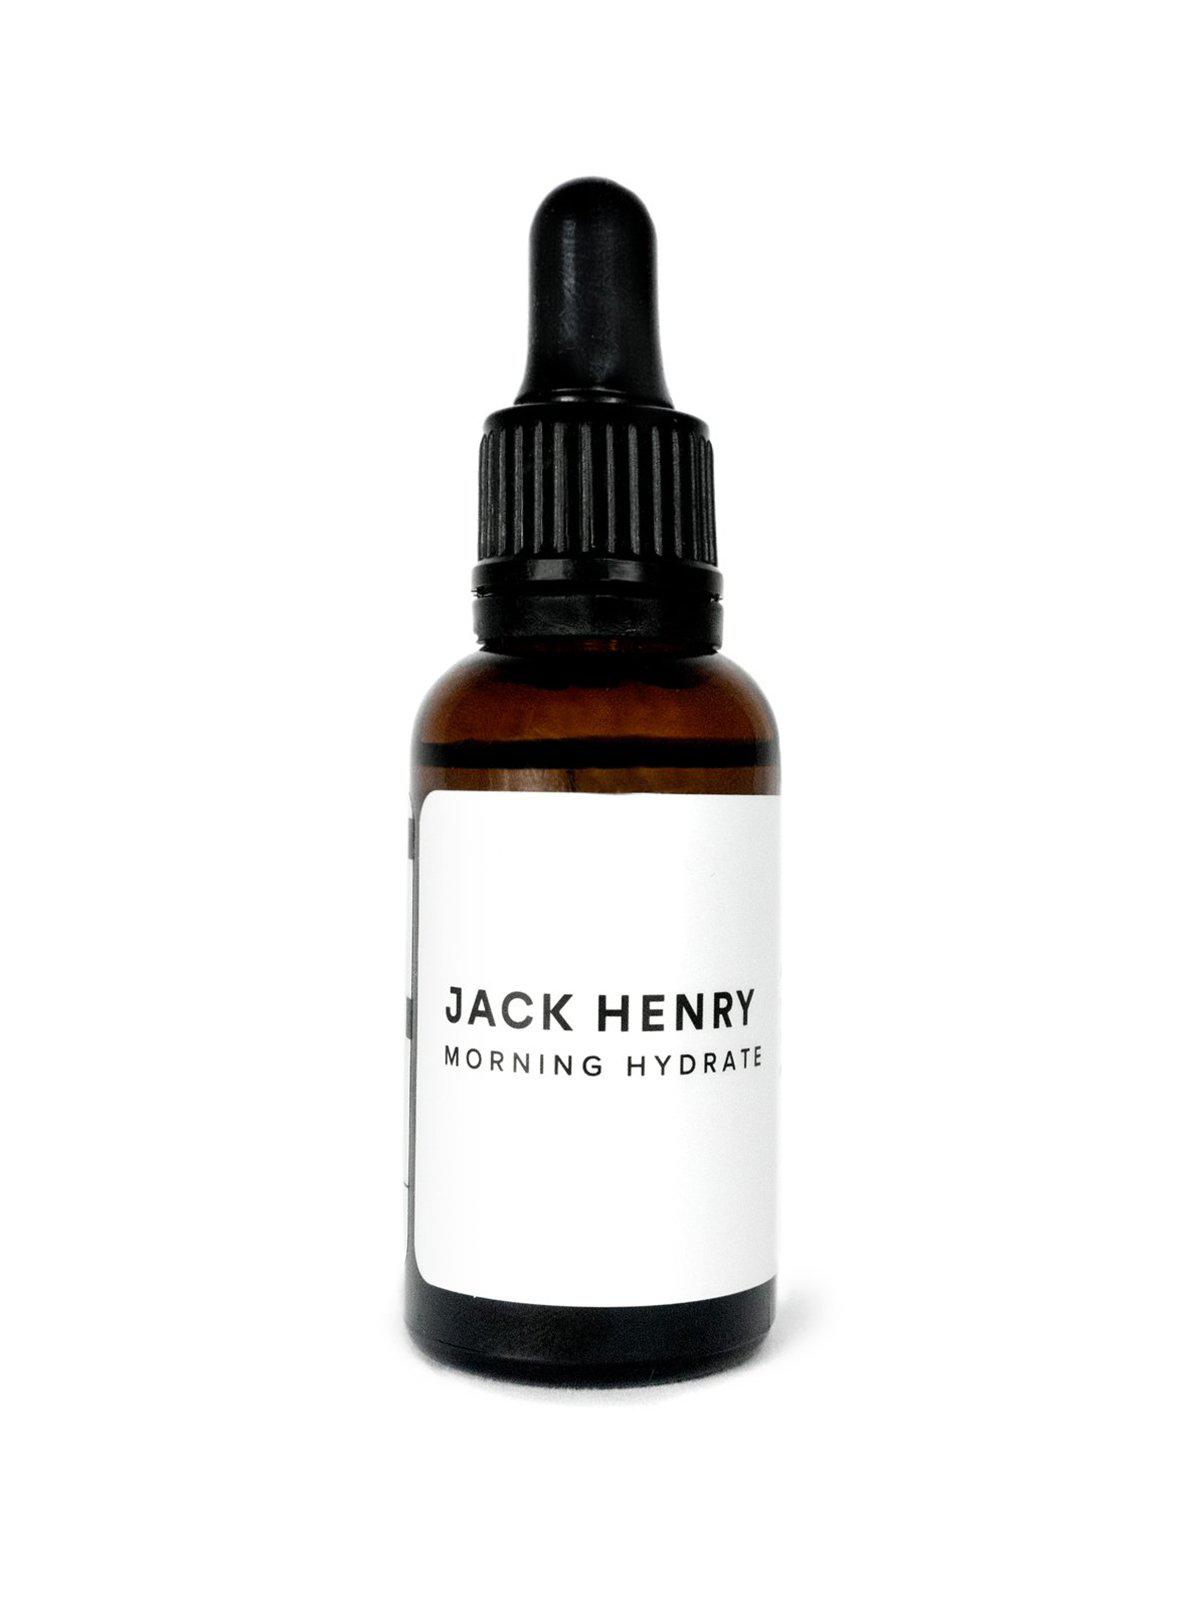 Jack Henry Morning Hydrate 1 oz - MORE by Morello Indonesia